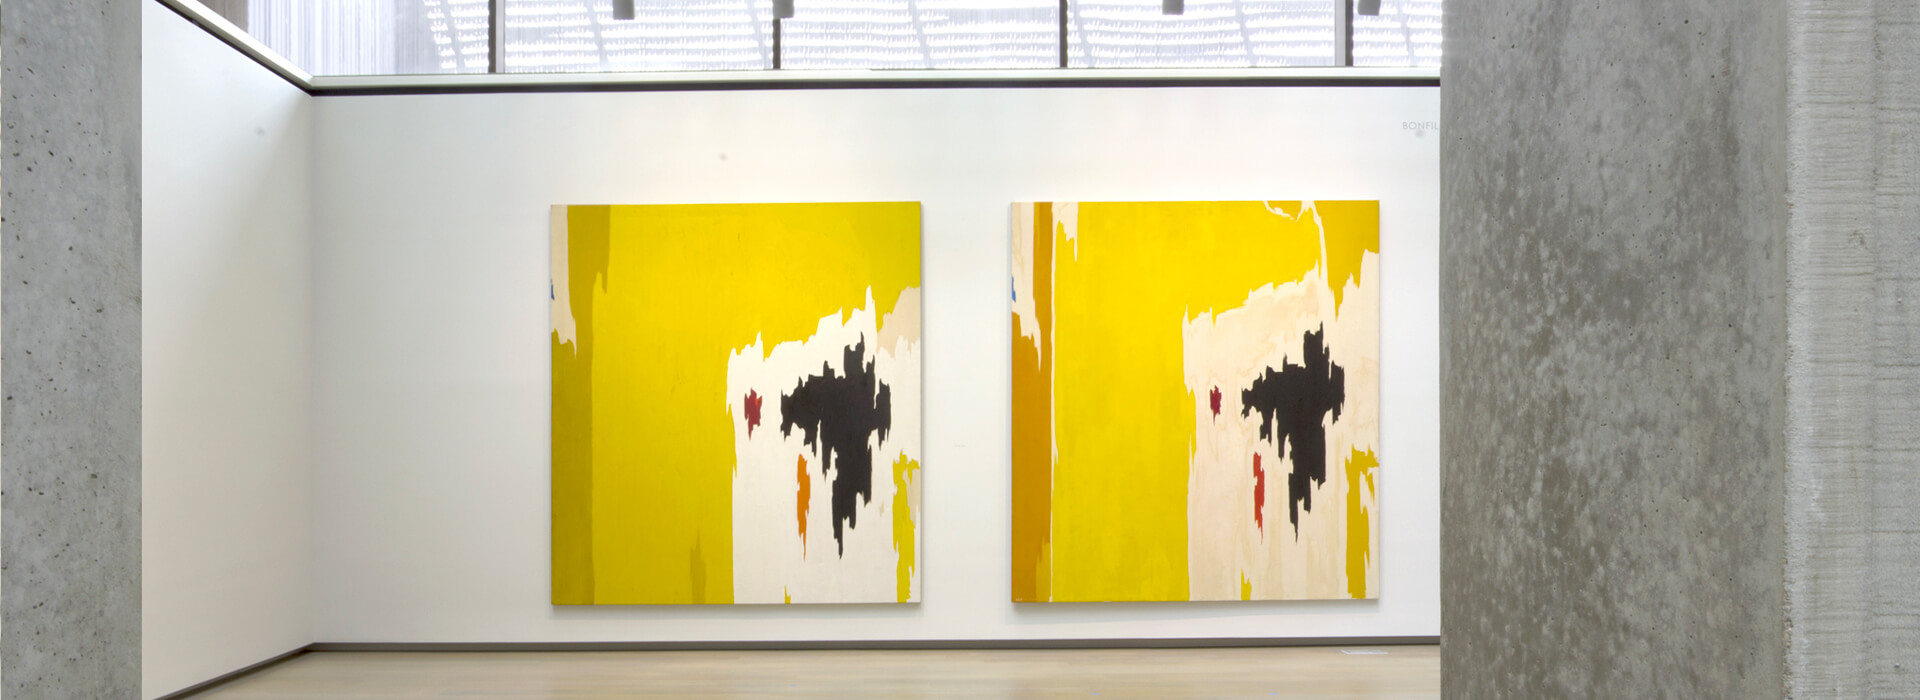 Two similar looking abstract oil paintings with mostly yellow, white and black paint hang on a wall next to each other